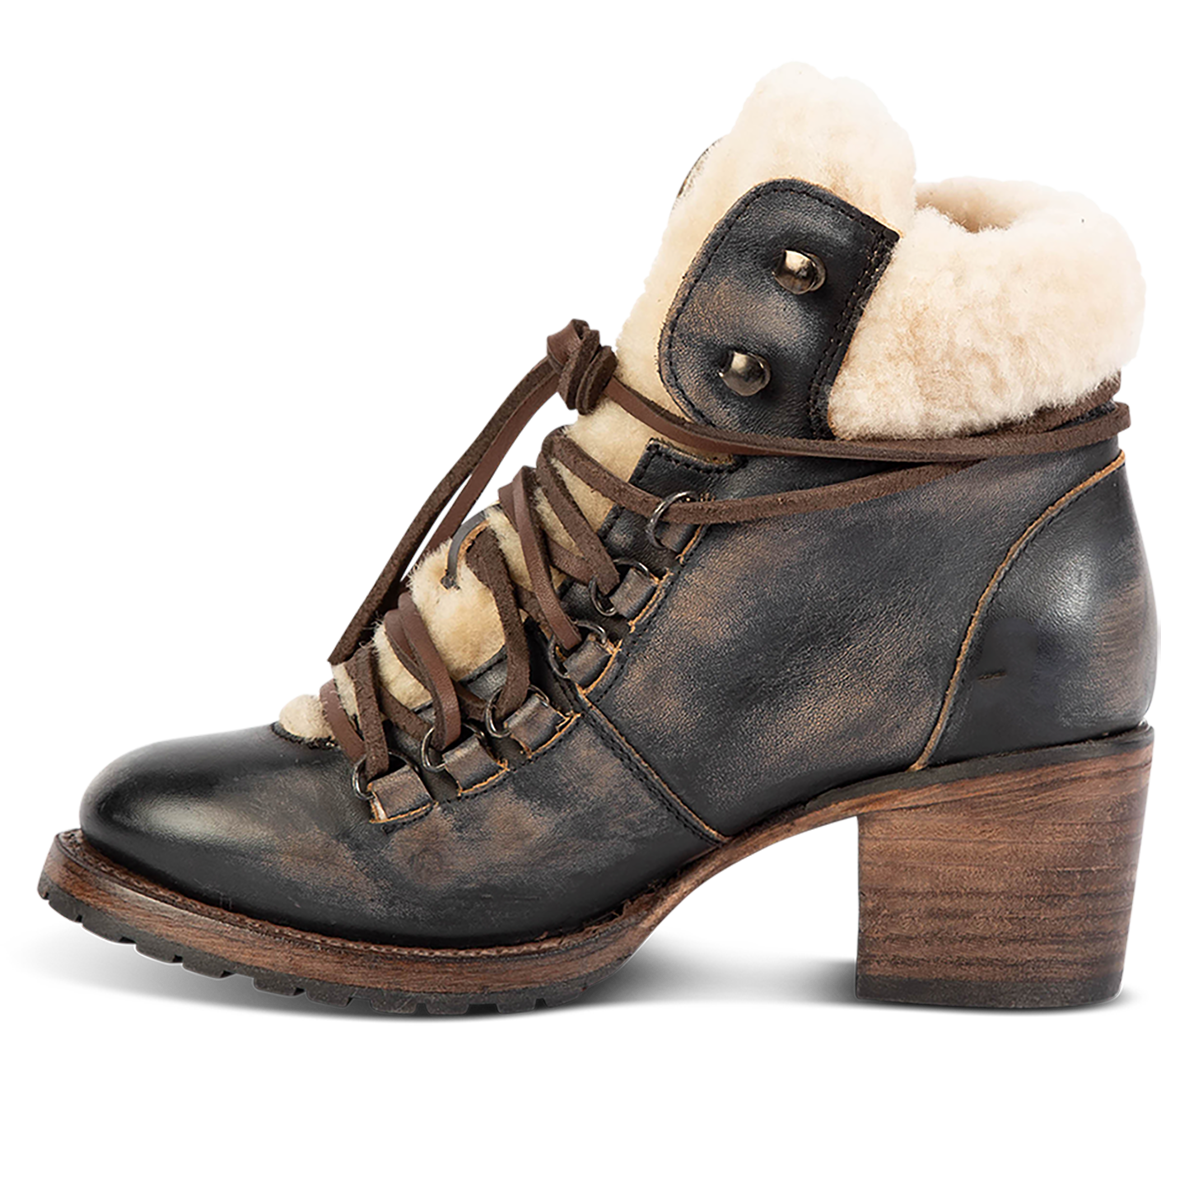 Inside view showing shearling ankle trim and wrap around leather lacing on FREEBIRD women's Norway black leather bootie